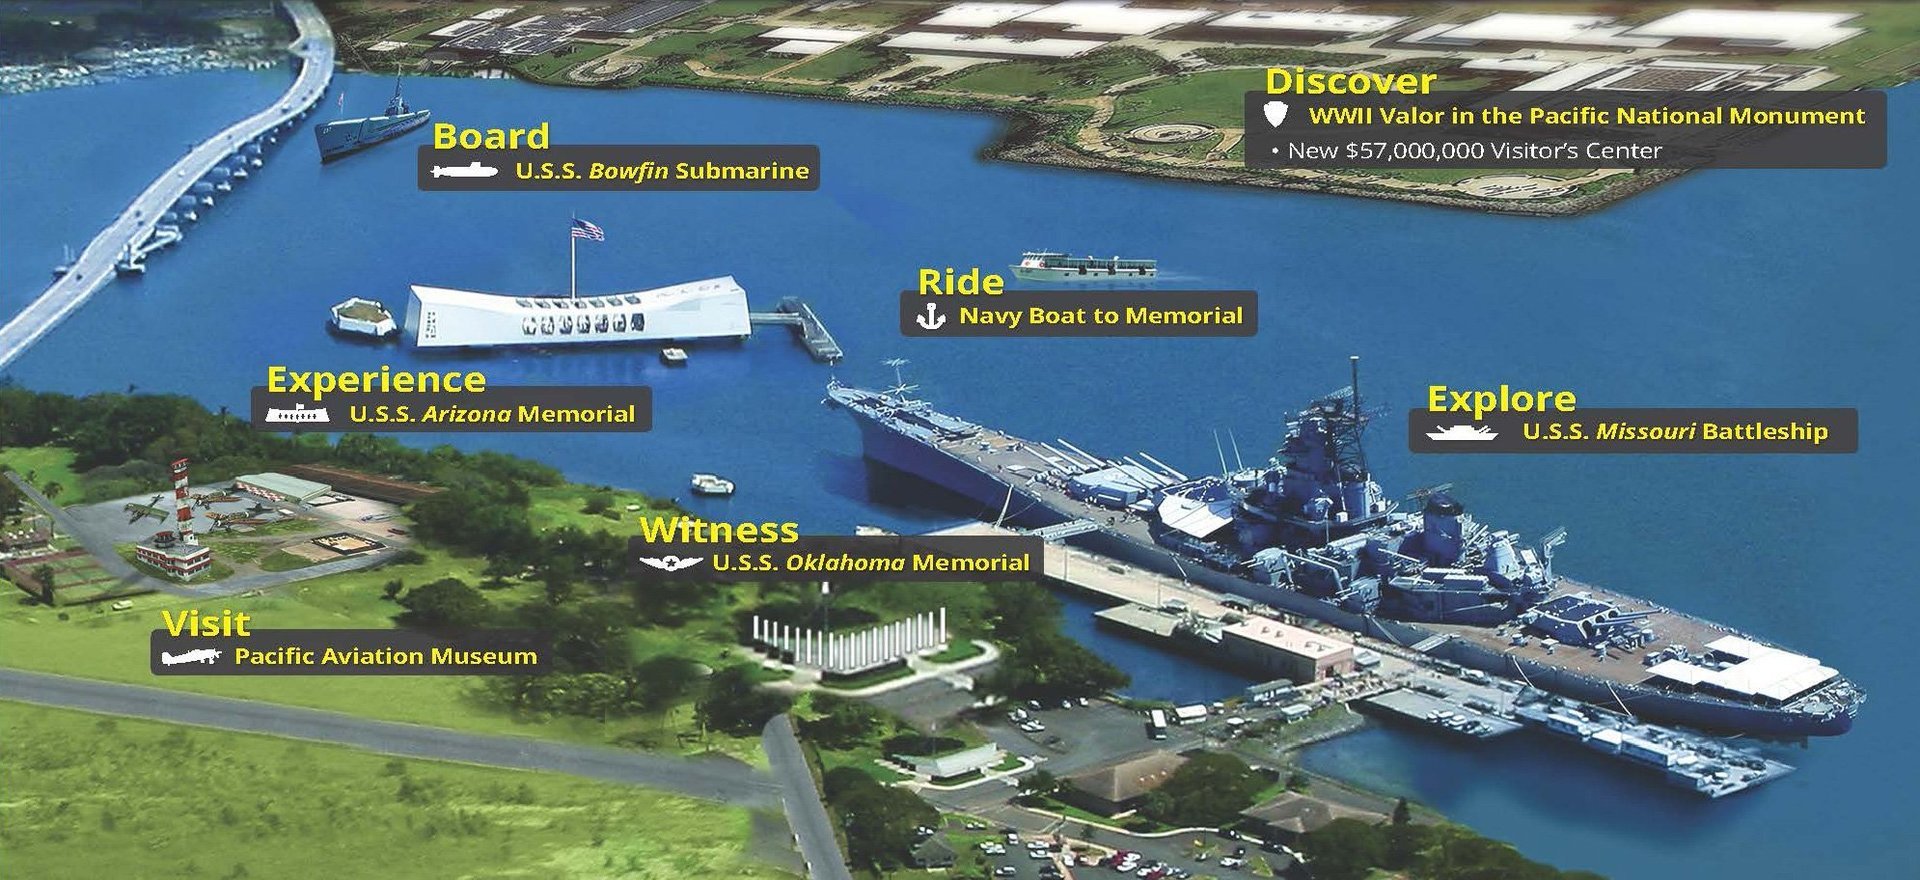 Maps & National Monument Diagram About Pearl Harbor